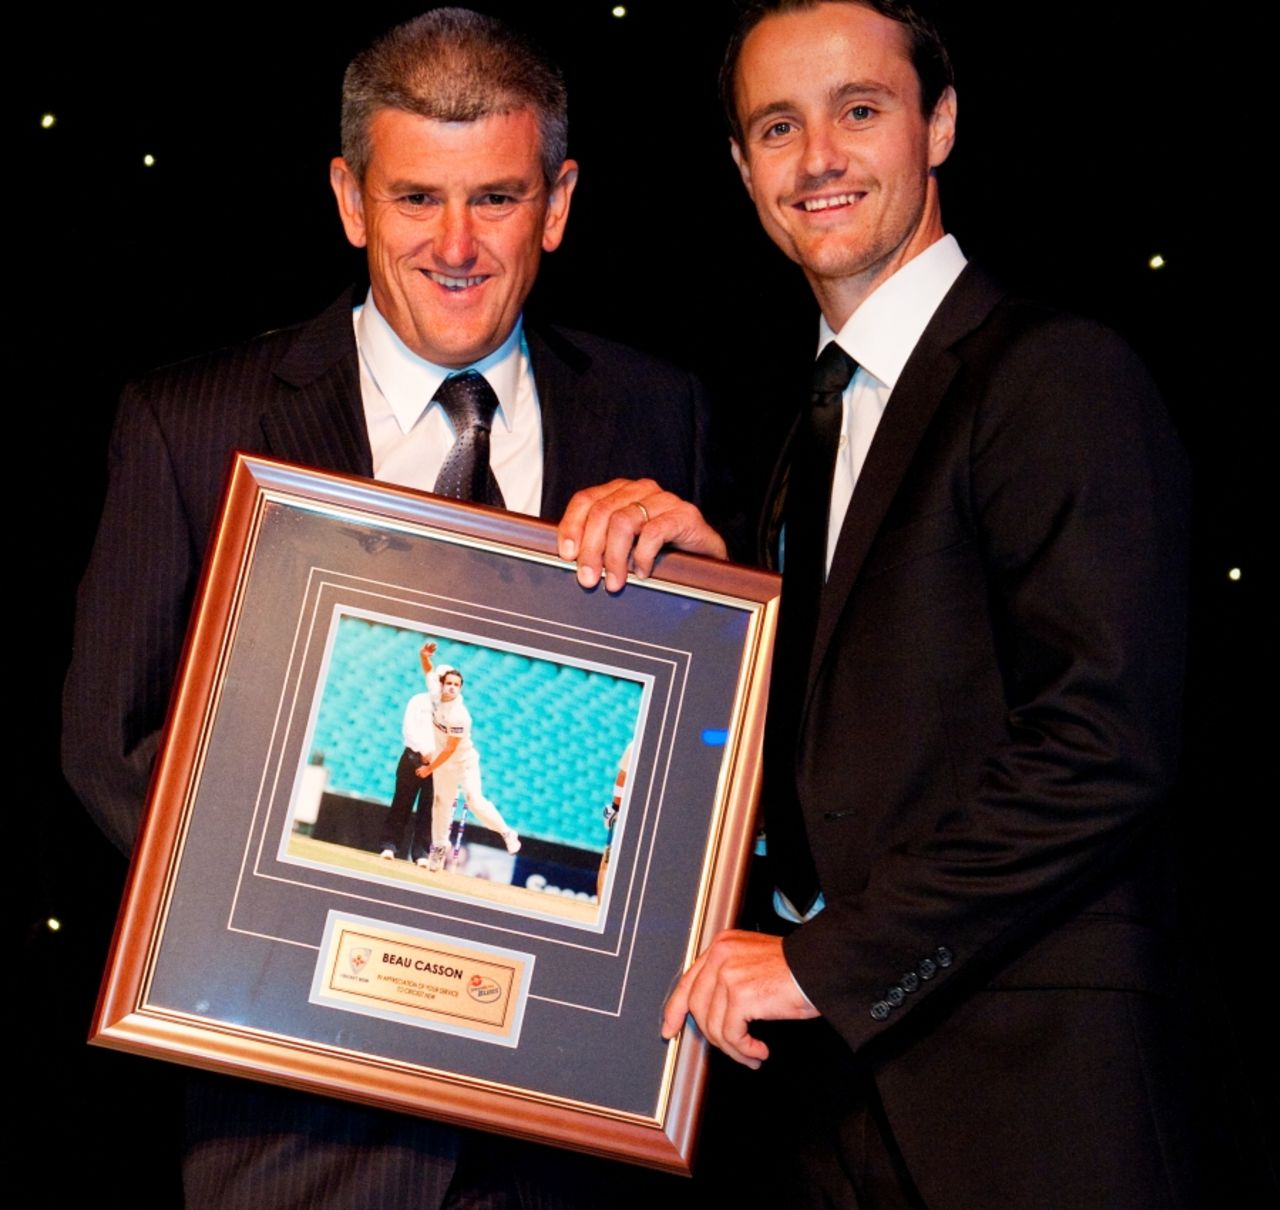 Beau Casson receives a presentation at the Cricket New South Wales awards night, Sydney, March 23, 2012